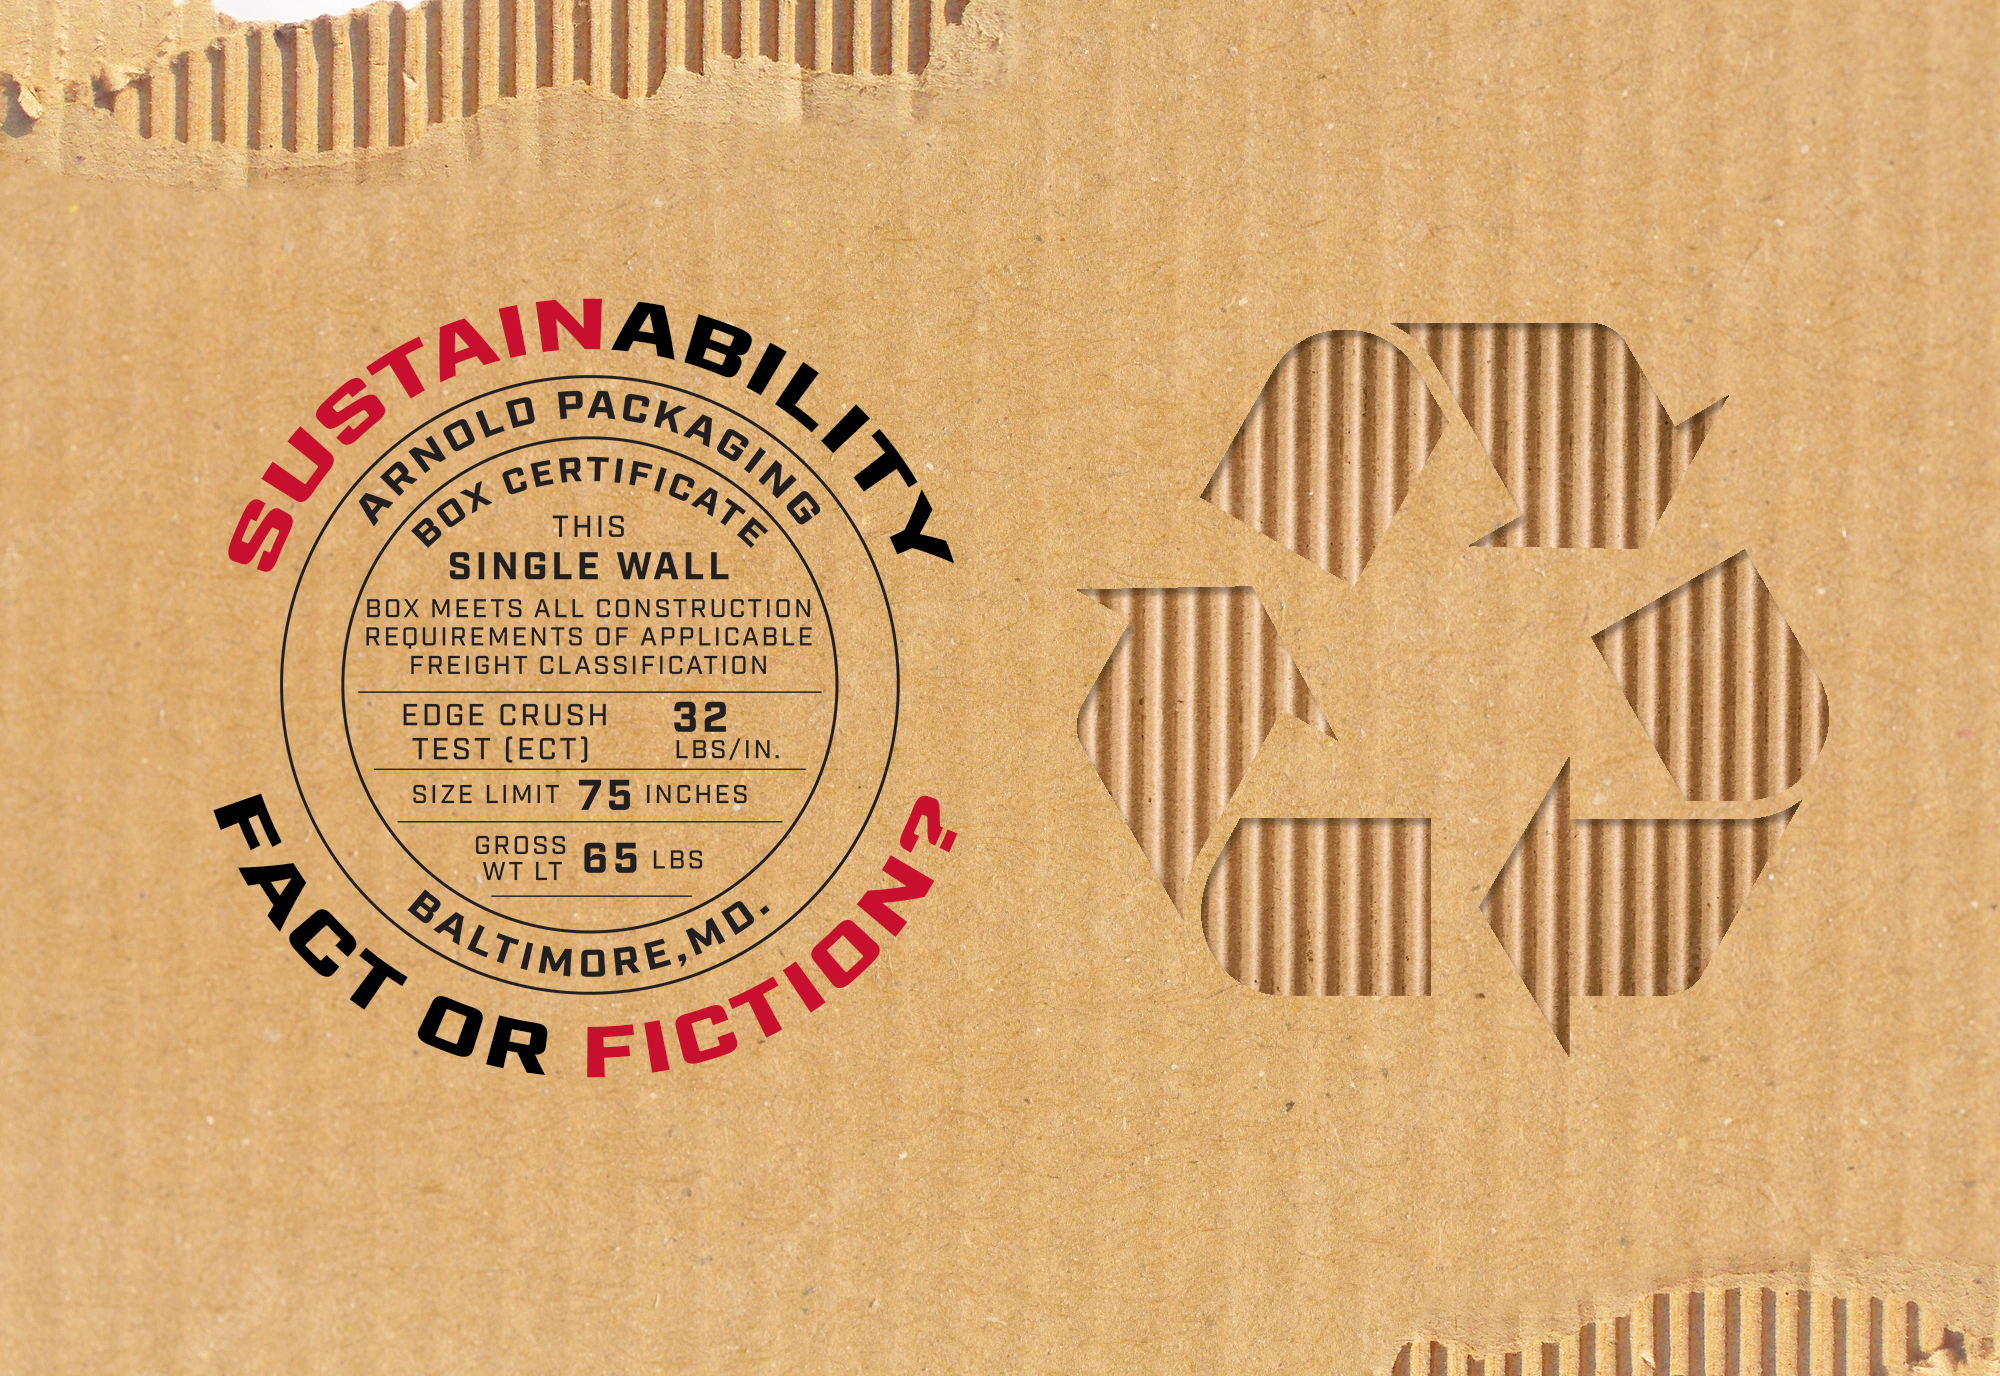 sustainable packaging - myth or fact